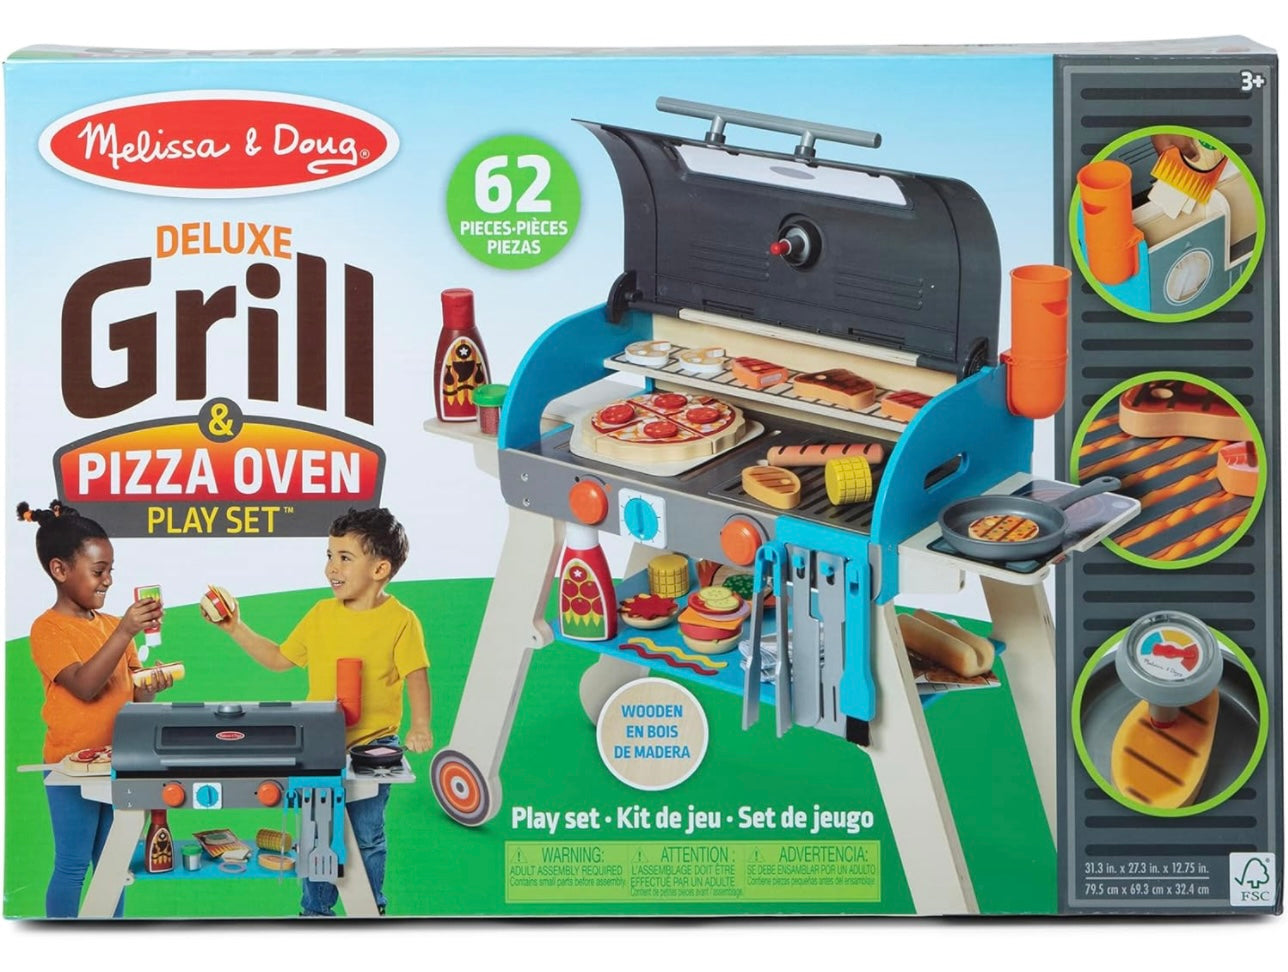 Grill & Pizza Oven Play Set